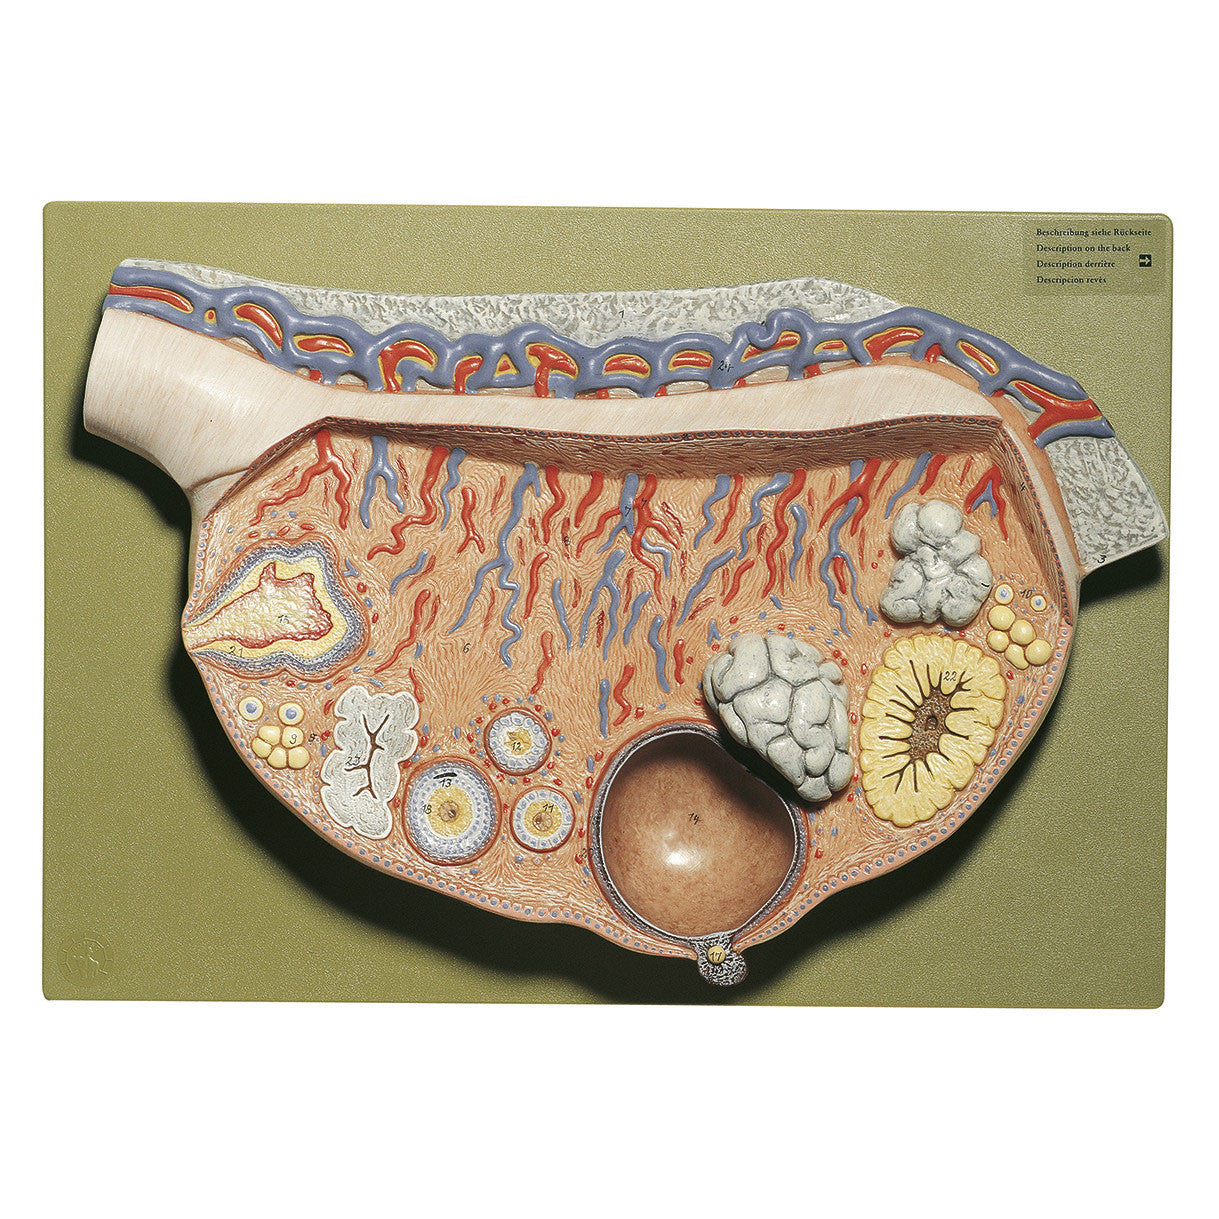 Relief Model of the Ovary Somso Ms 51